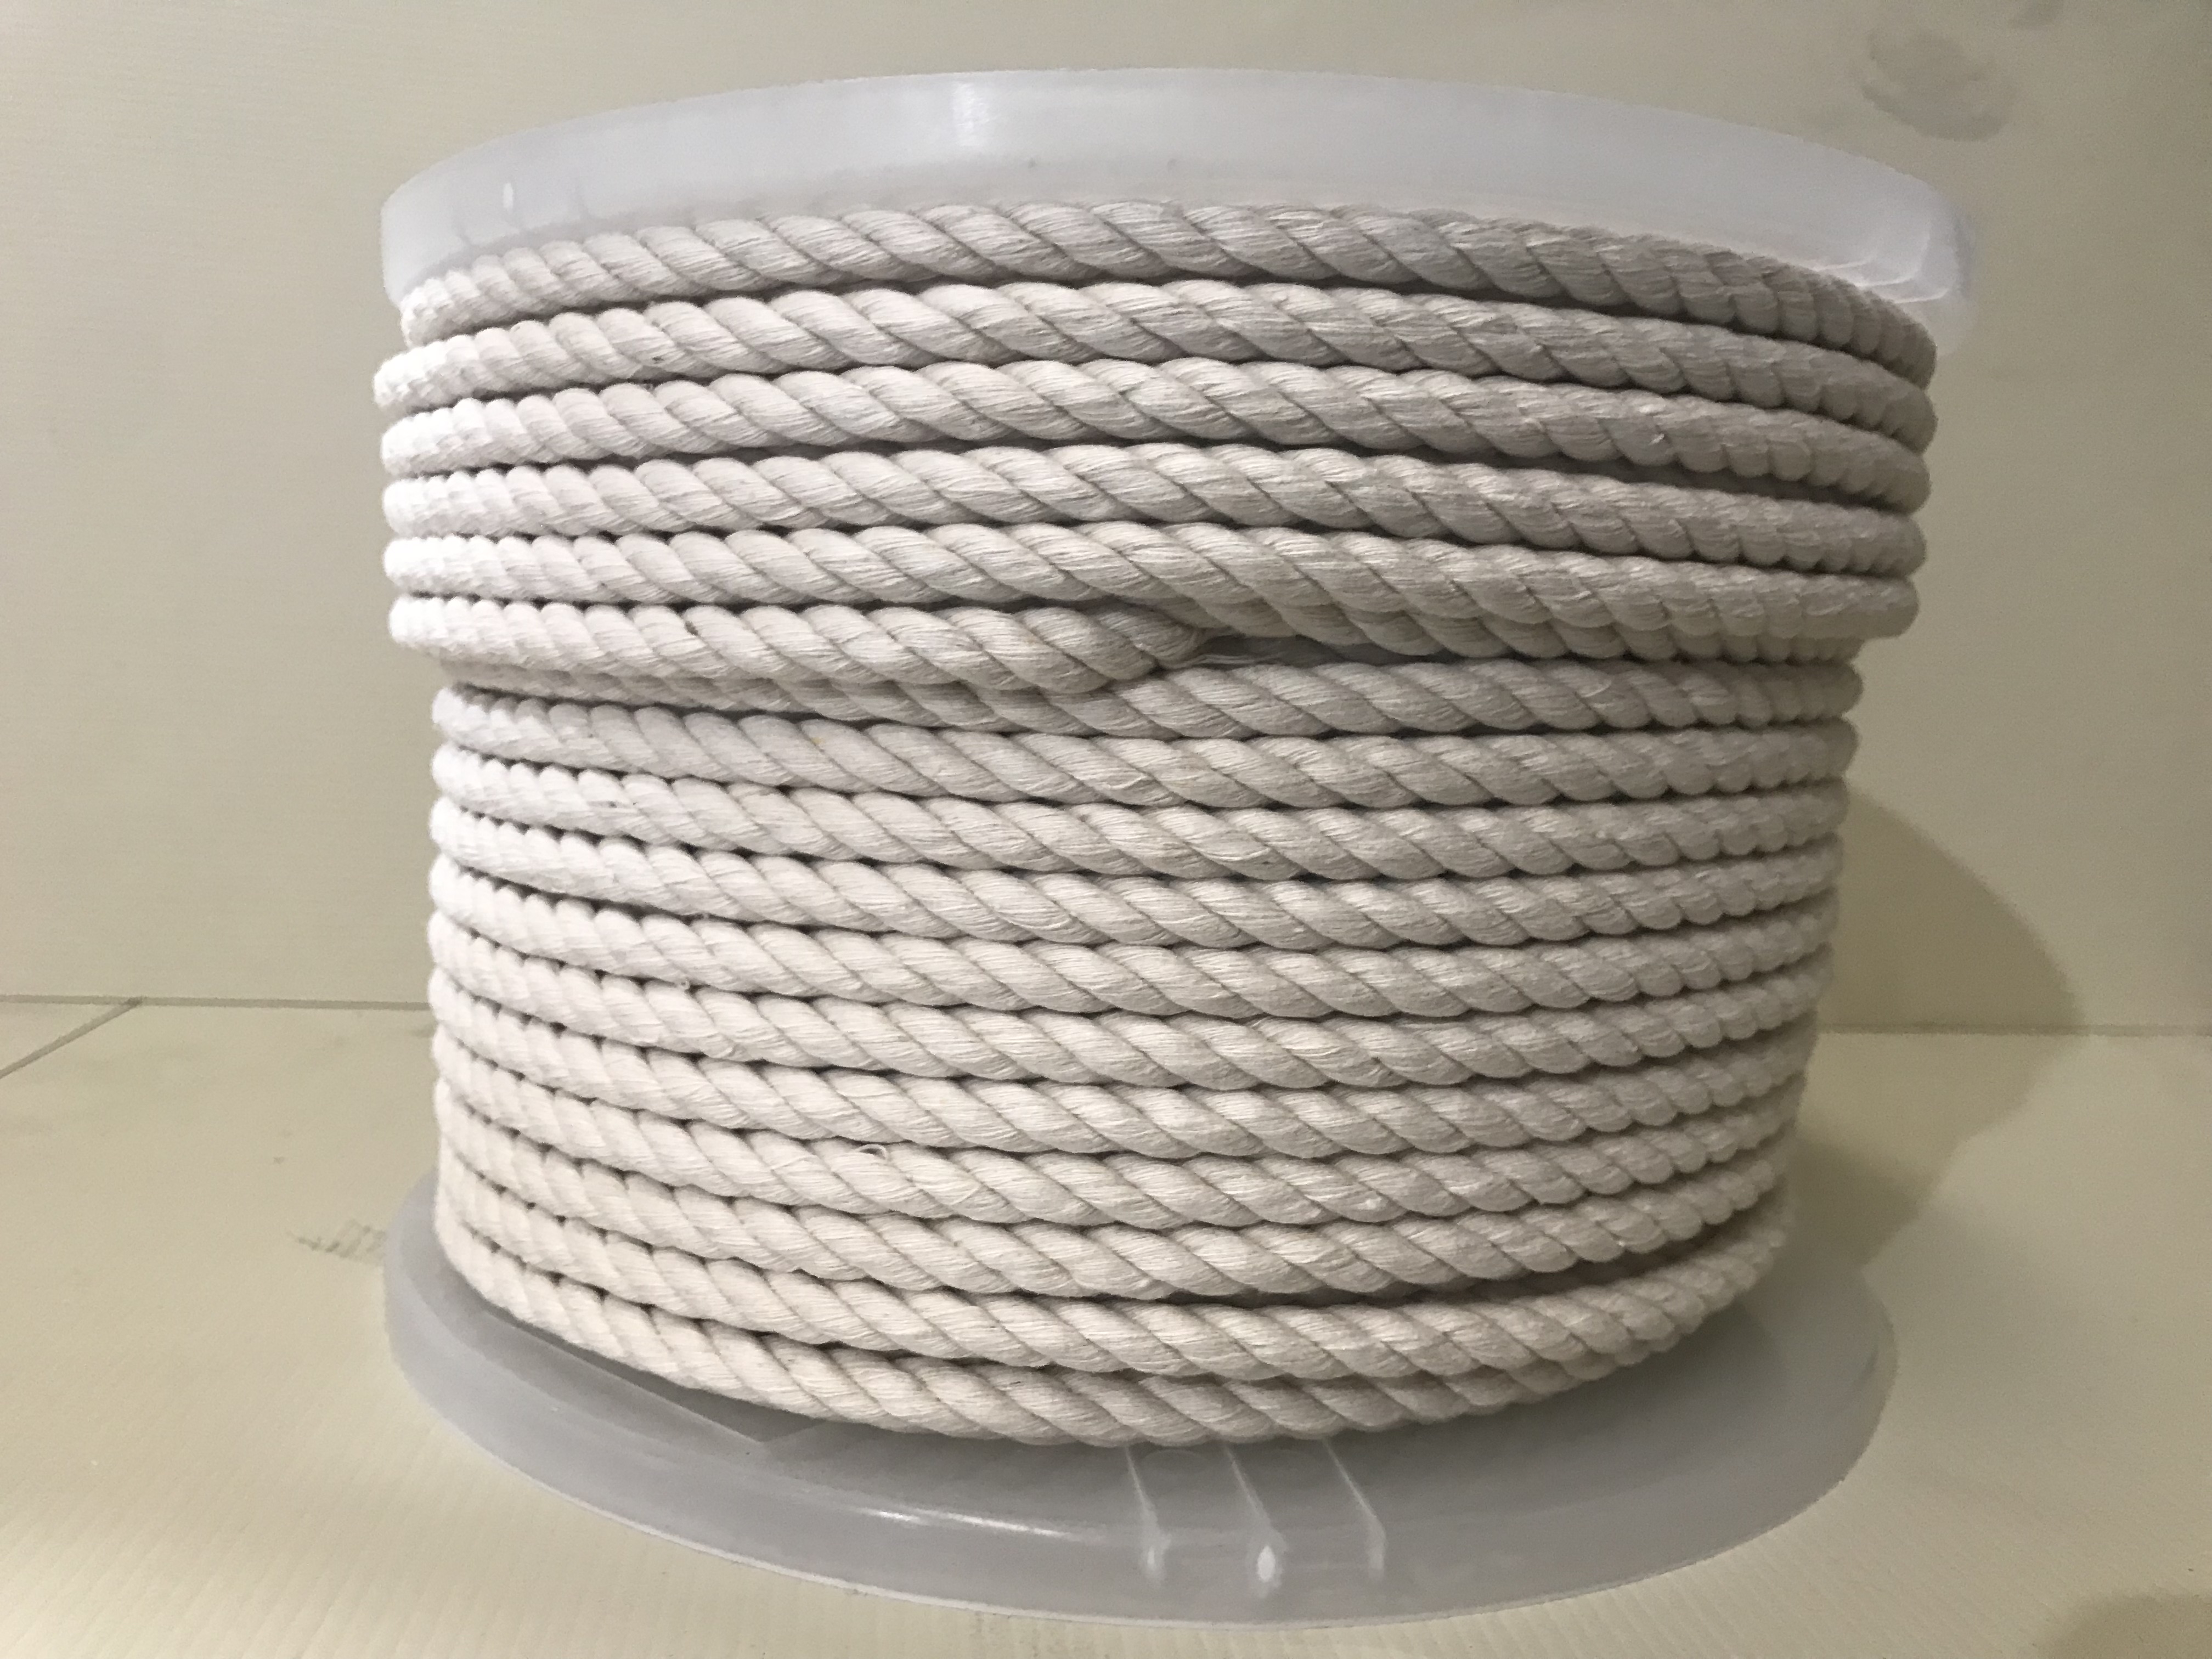 COTTON ROPE 10mm x 100mtrs REEL